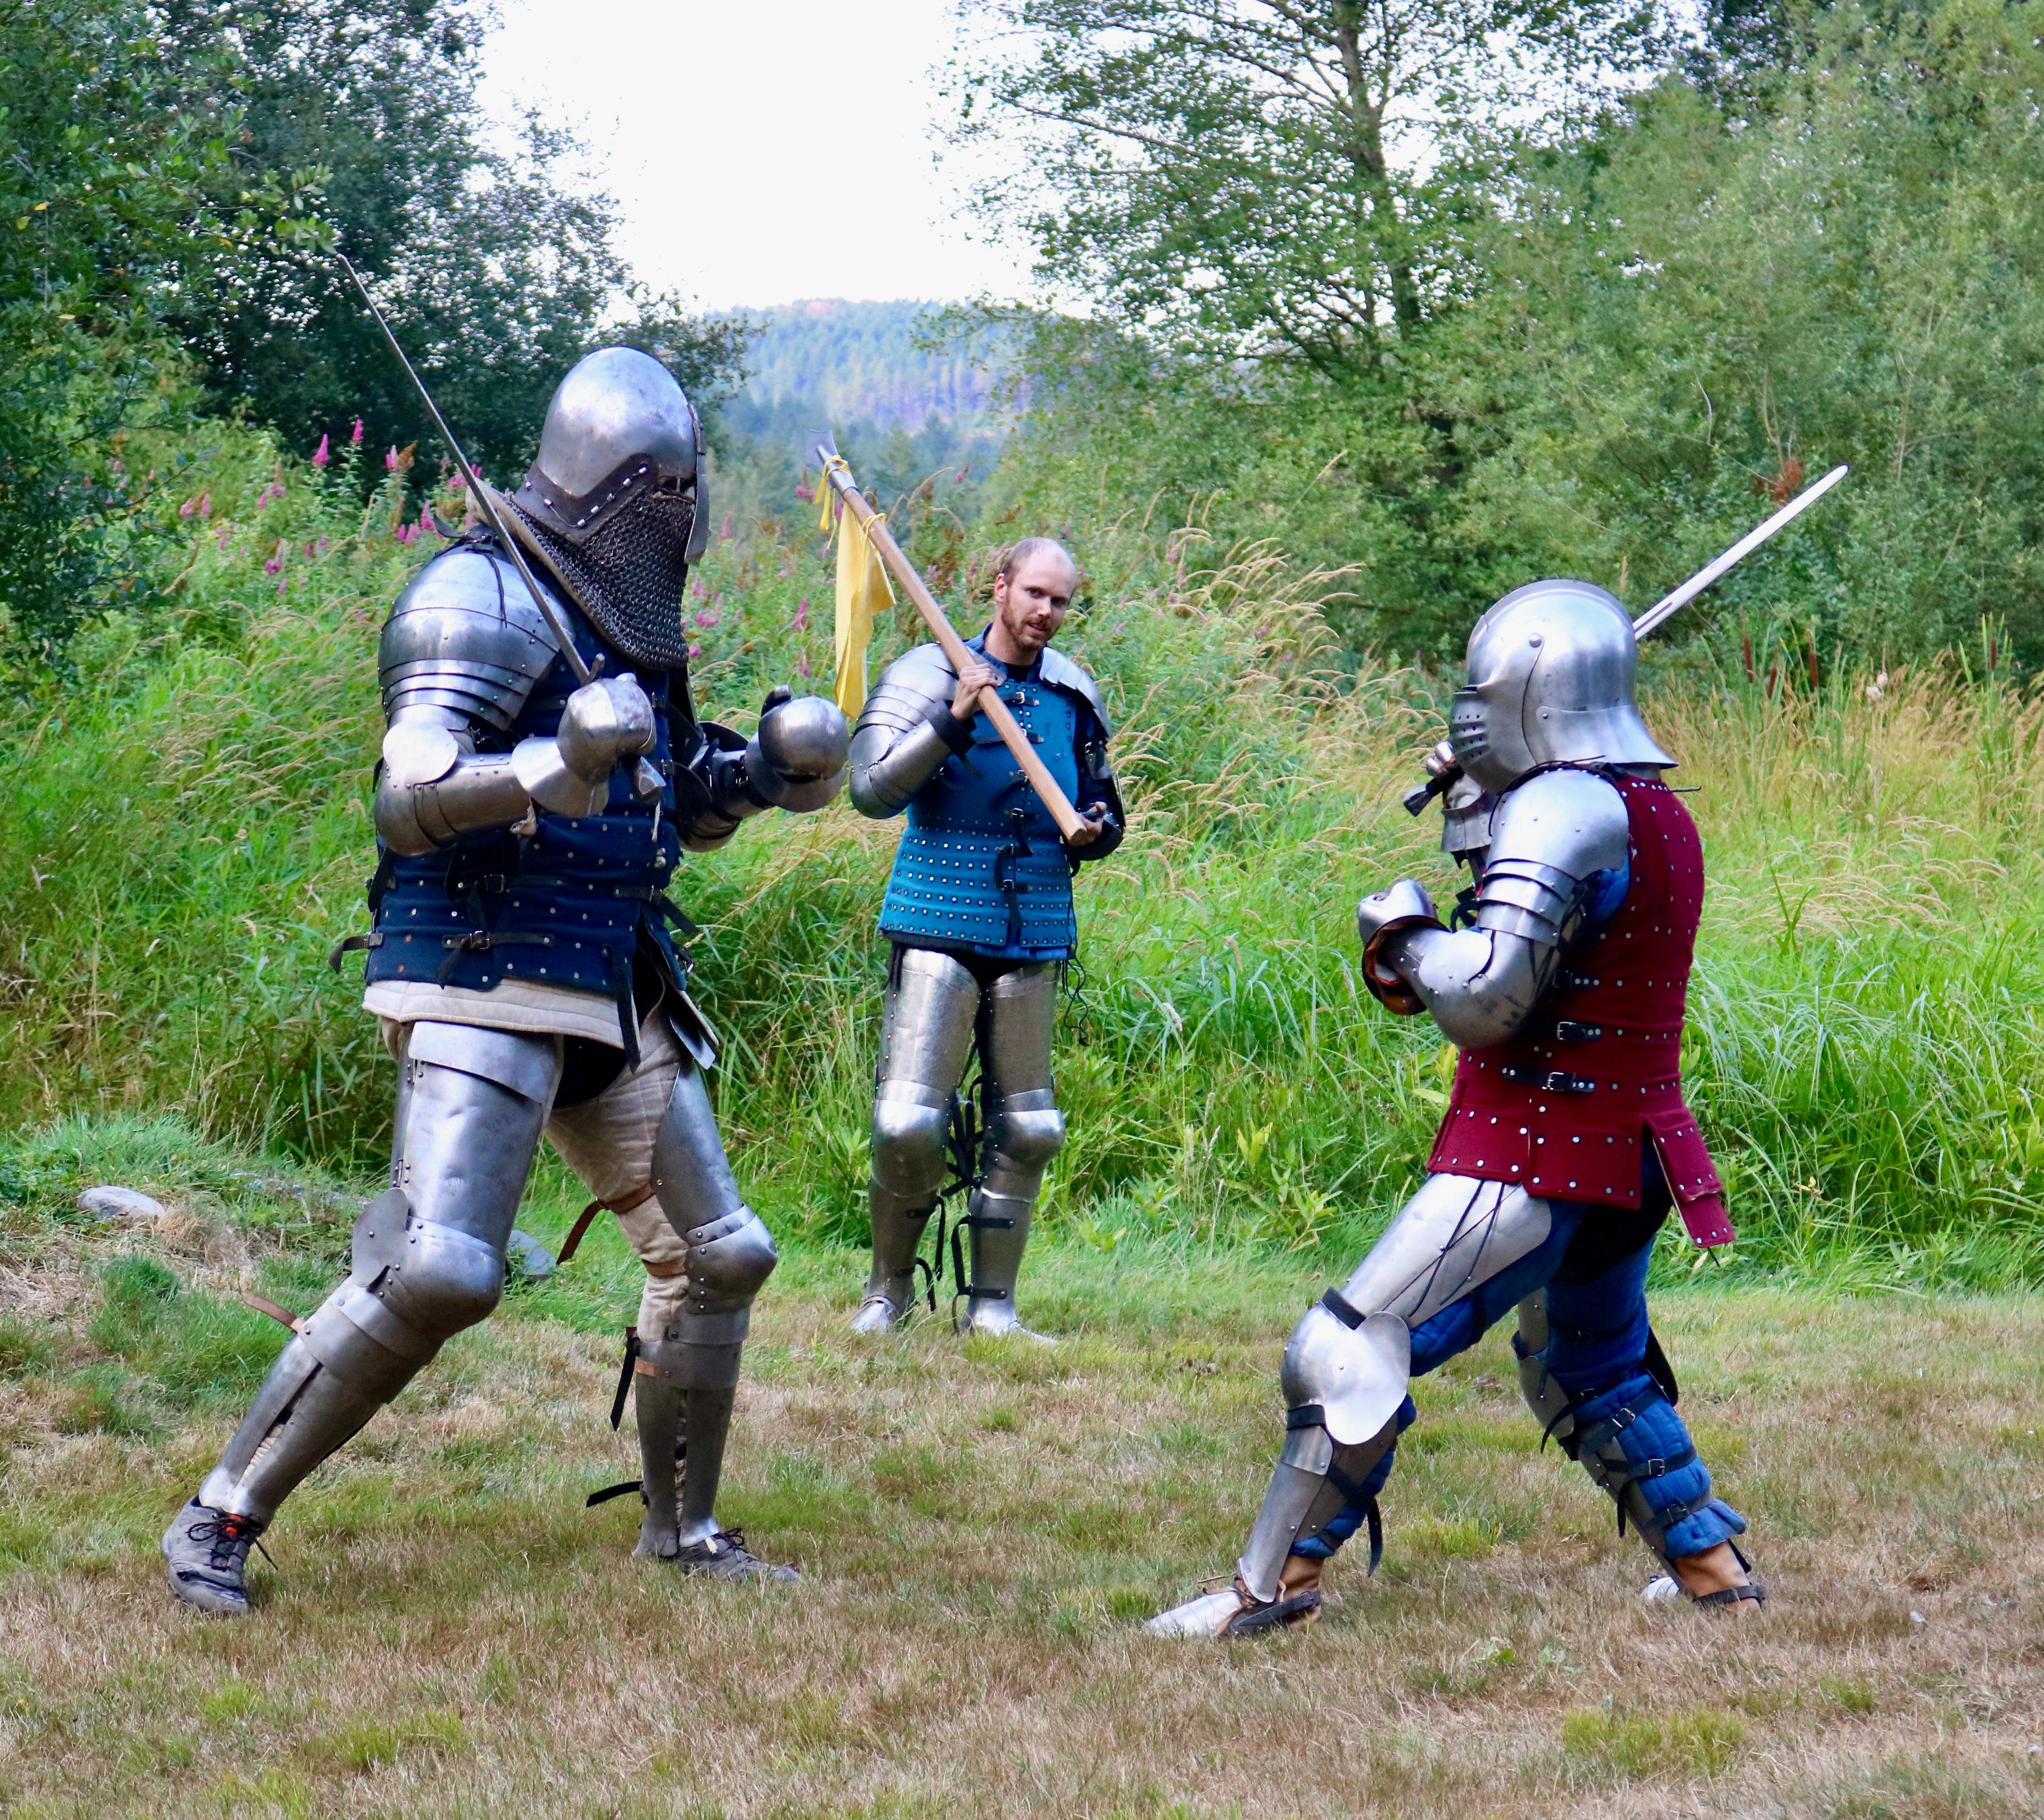 People in armor stage a mock swordfight